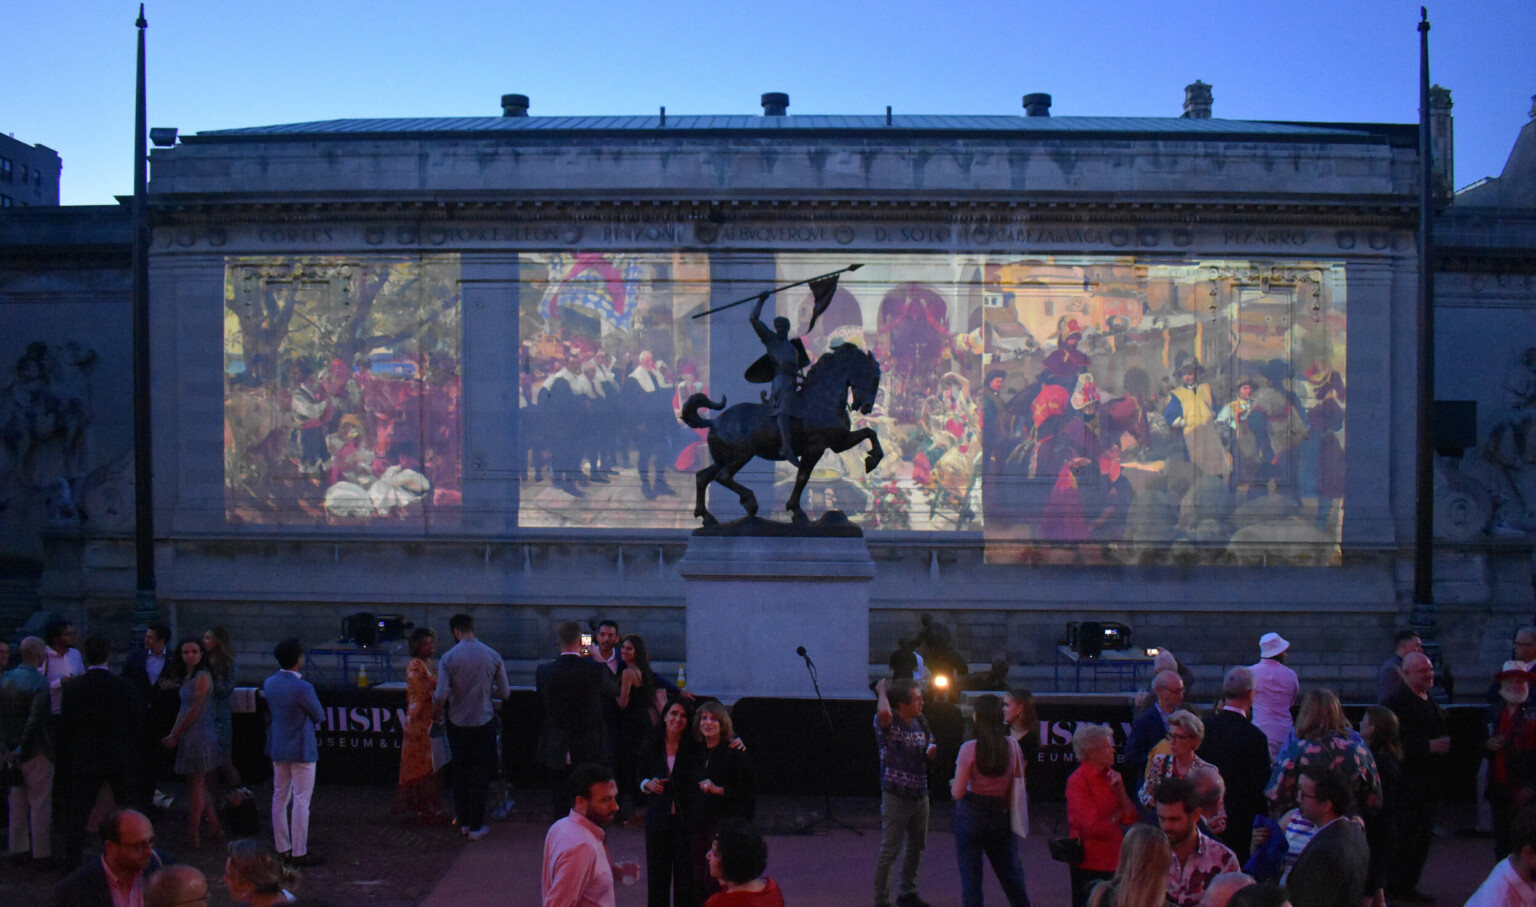 The Hispanic Society of New York, paintings projected on the side of the building beyond a sculpture of a man on horseback